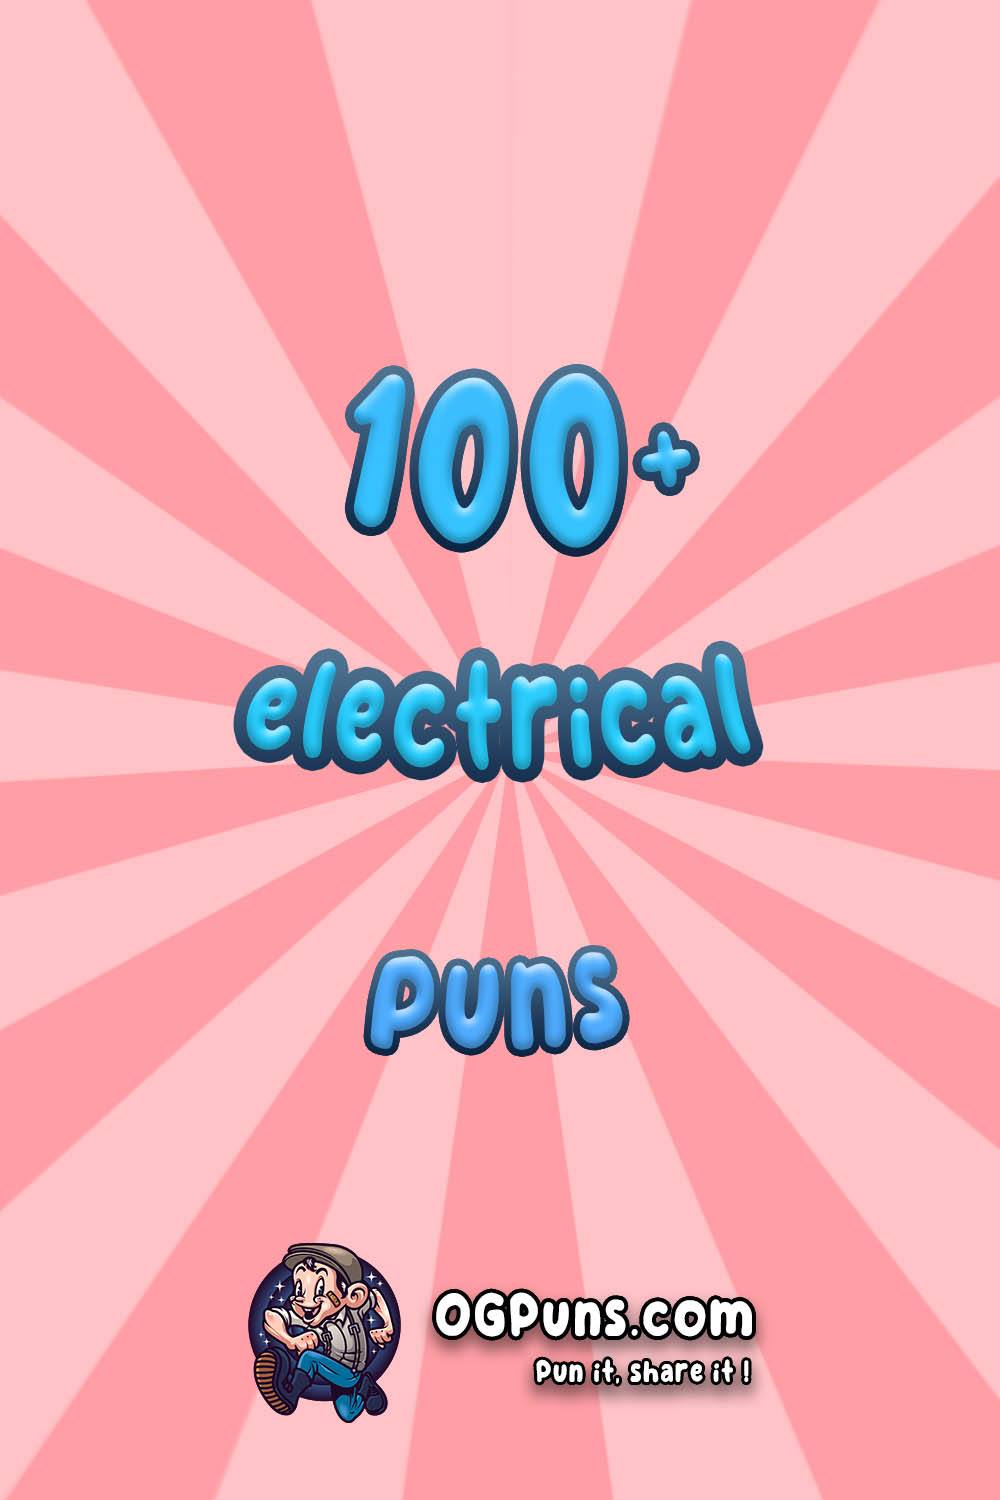 Electrical puns Image for Pinterest